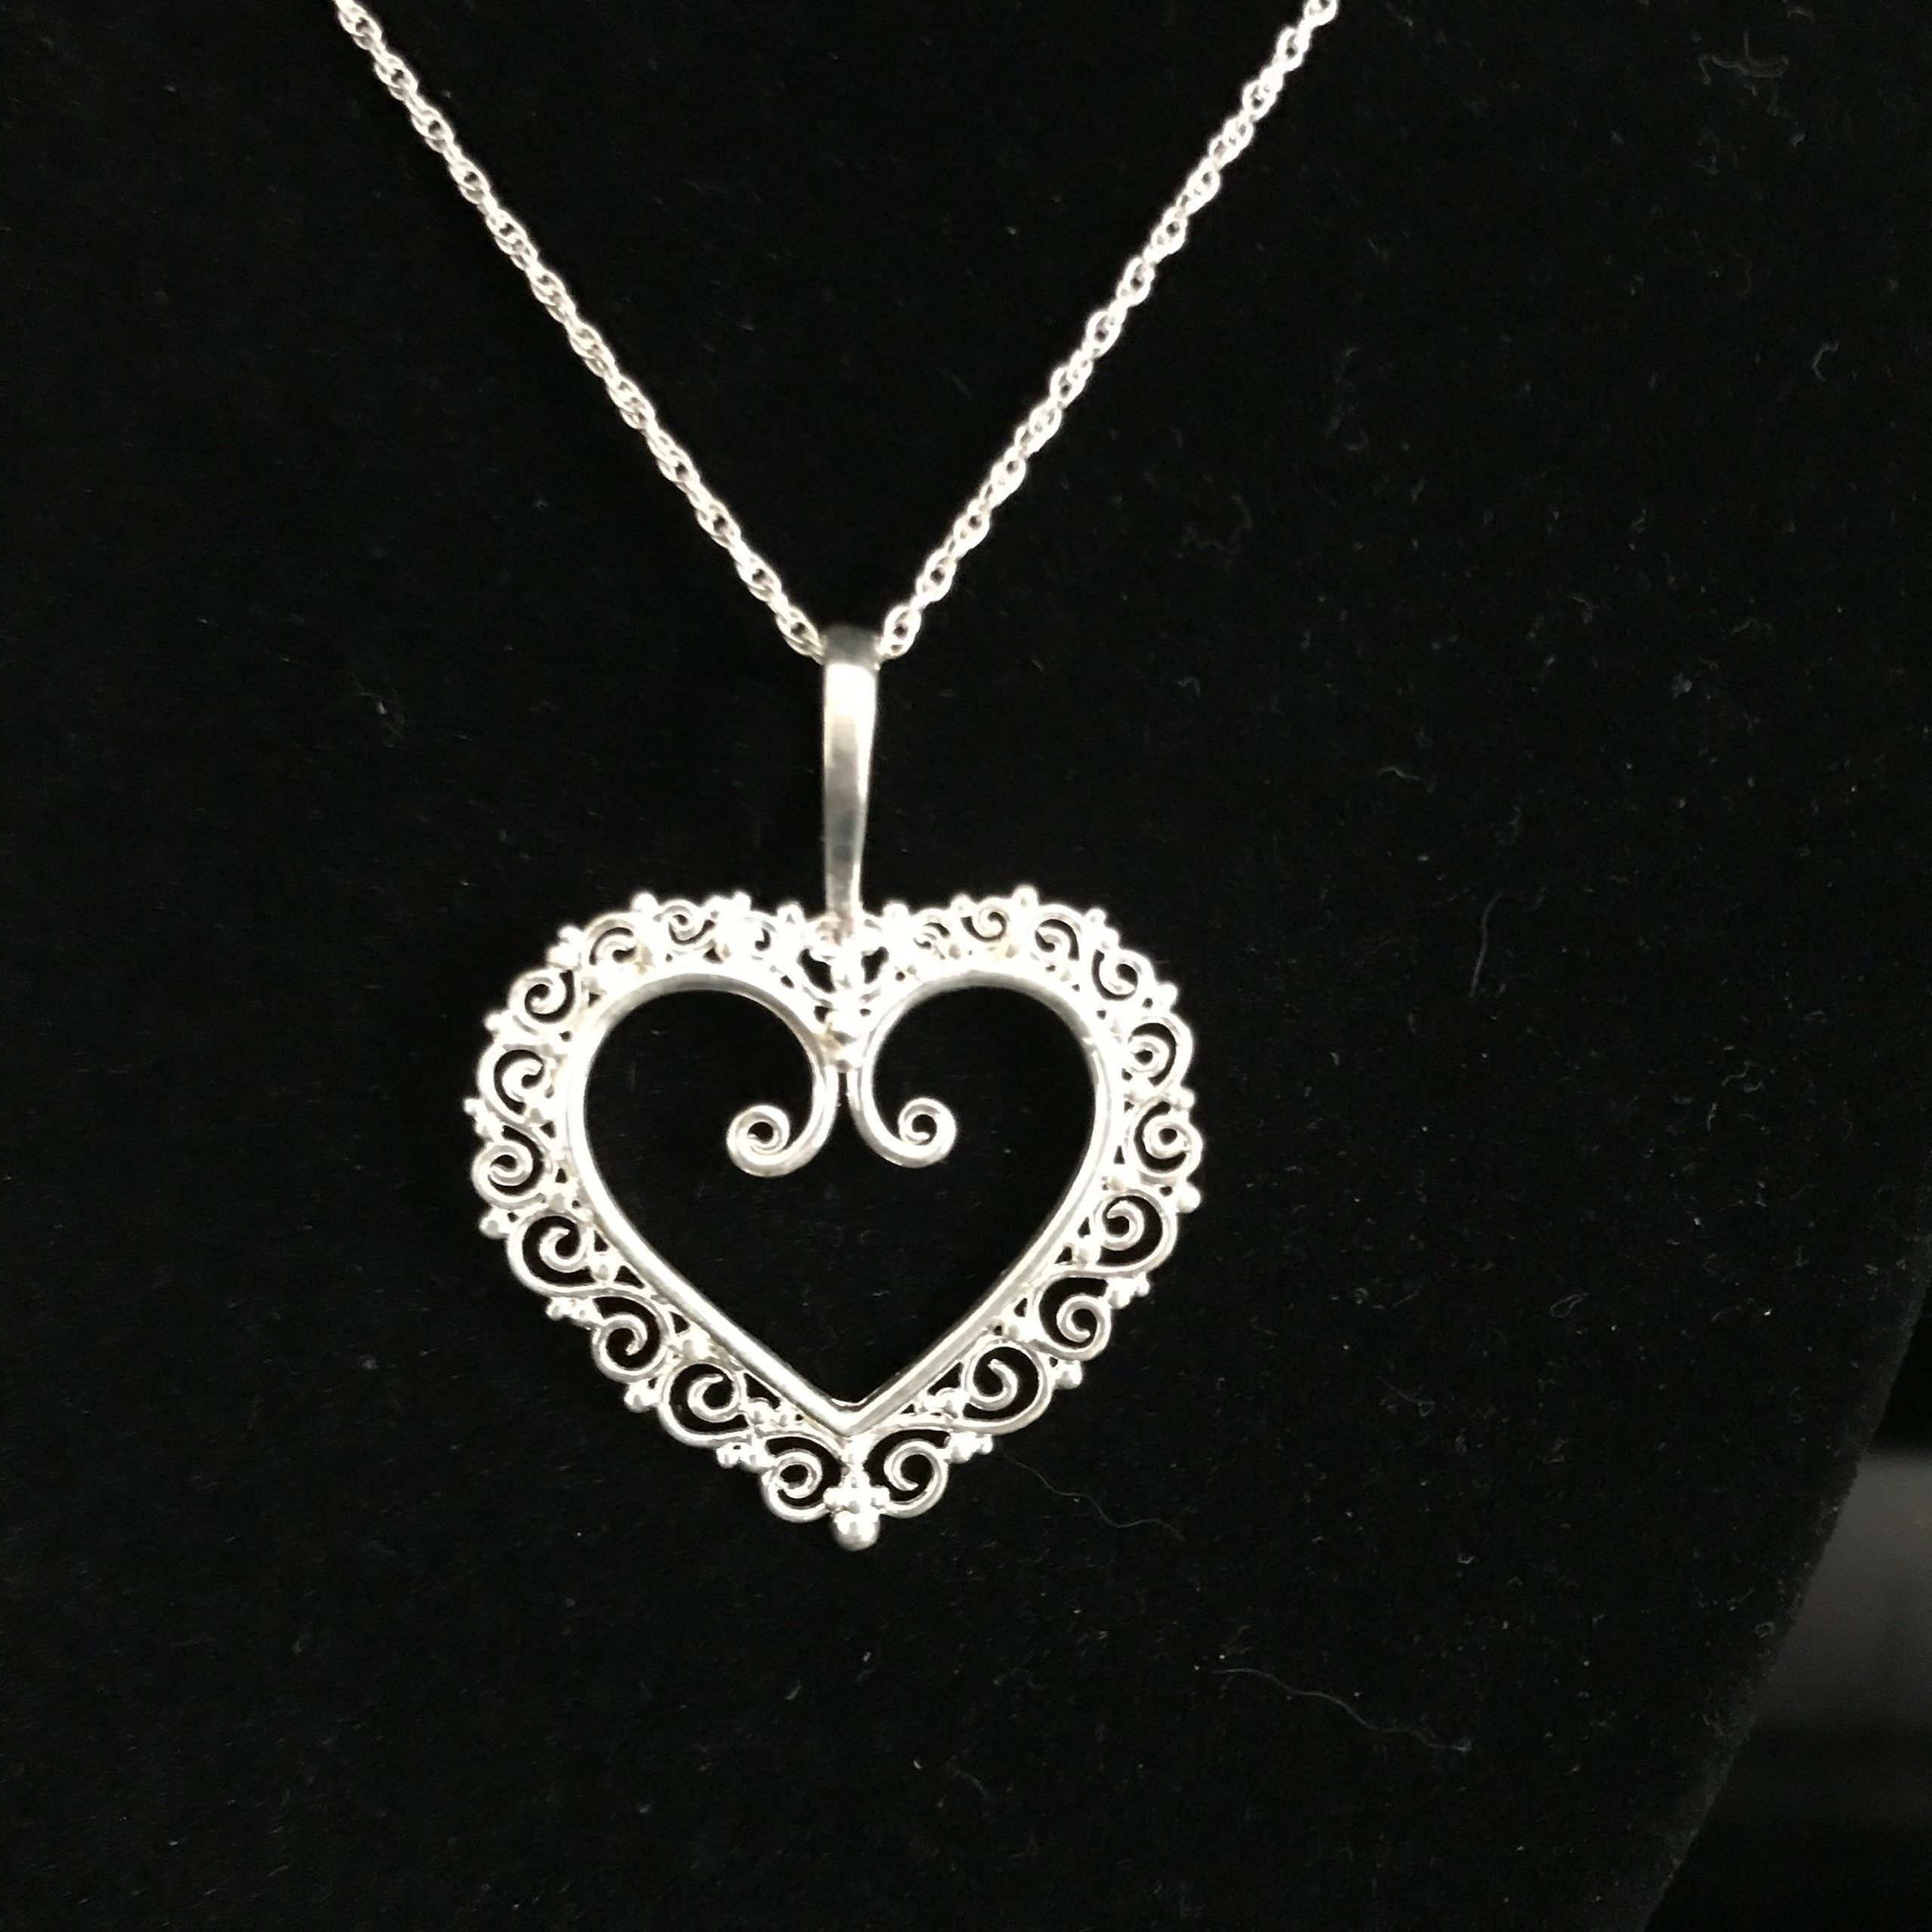 Vintage Sterling Silver Filigree Heart Pendant drop necklace with ...